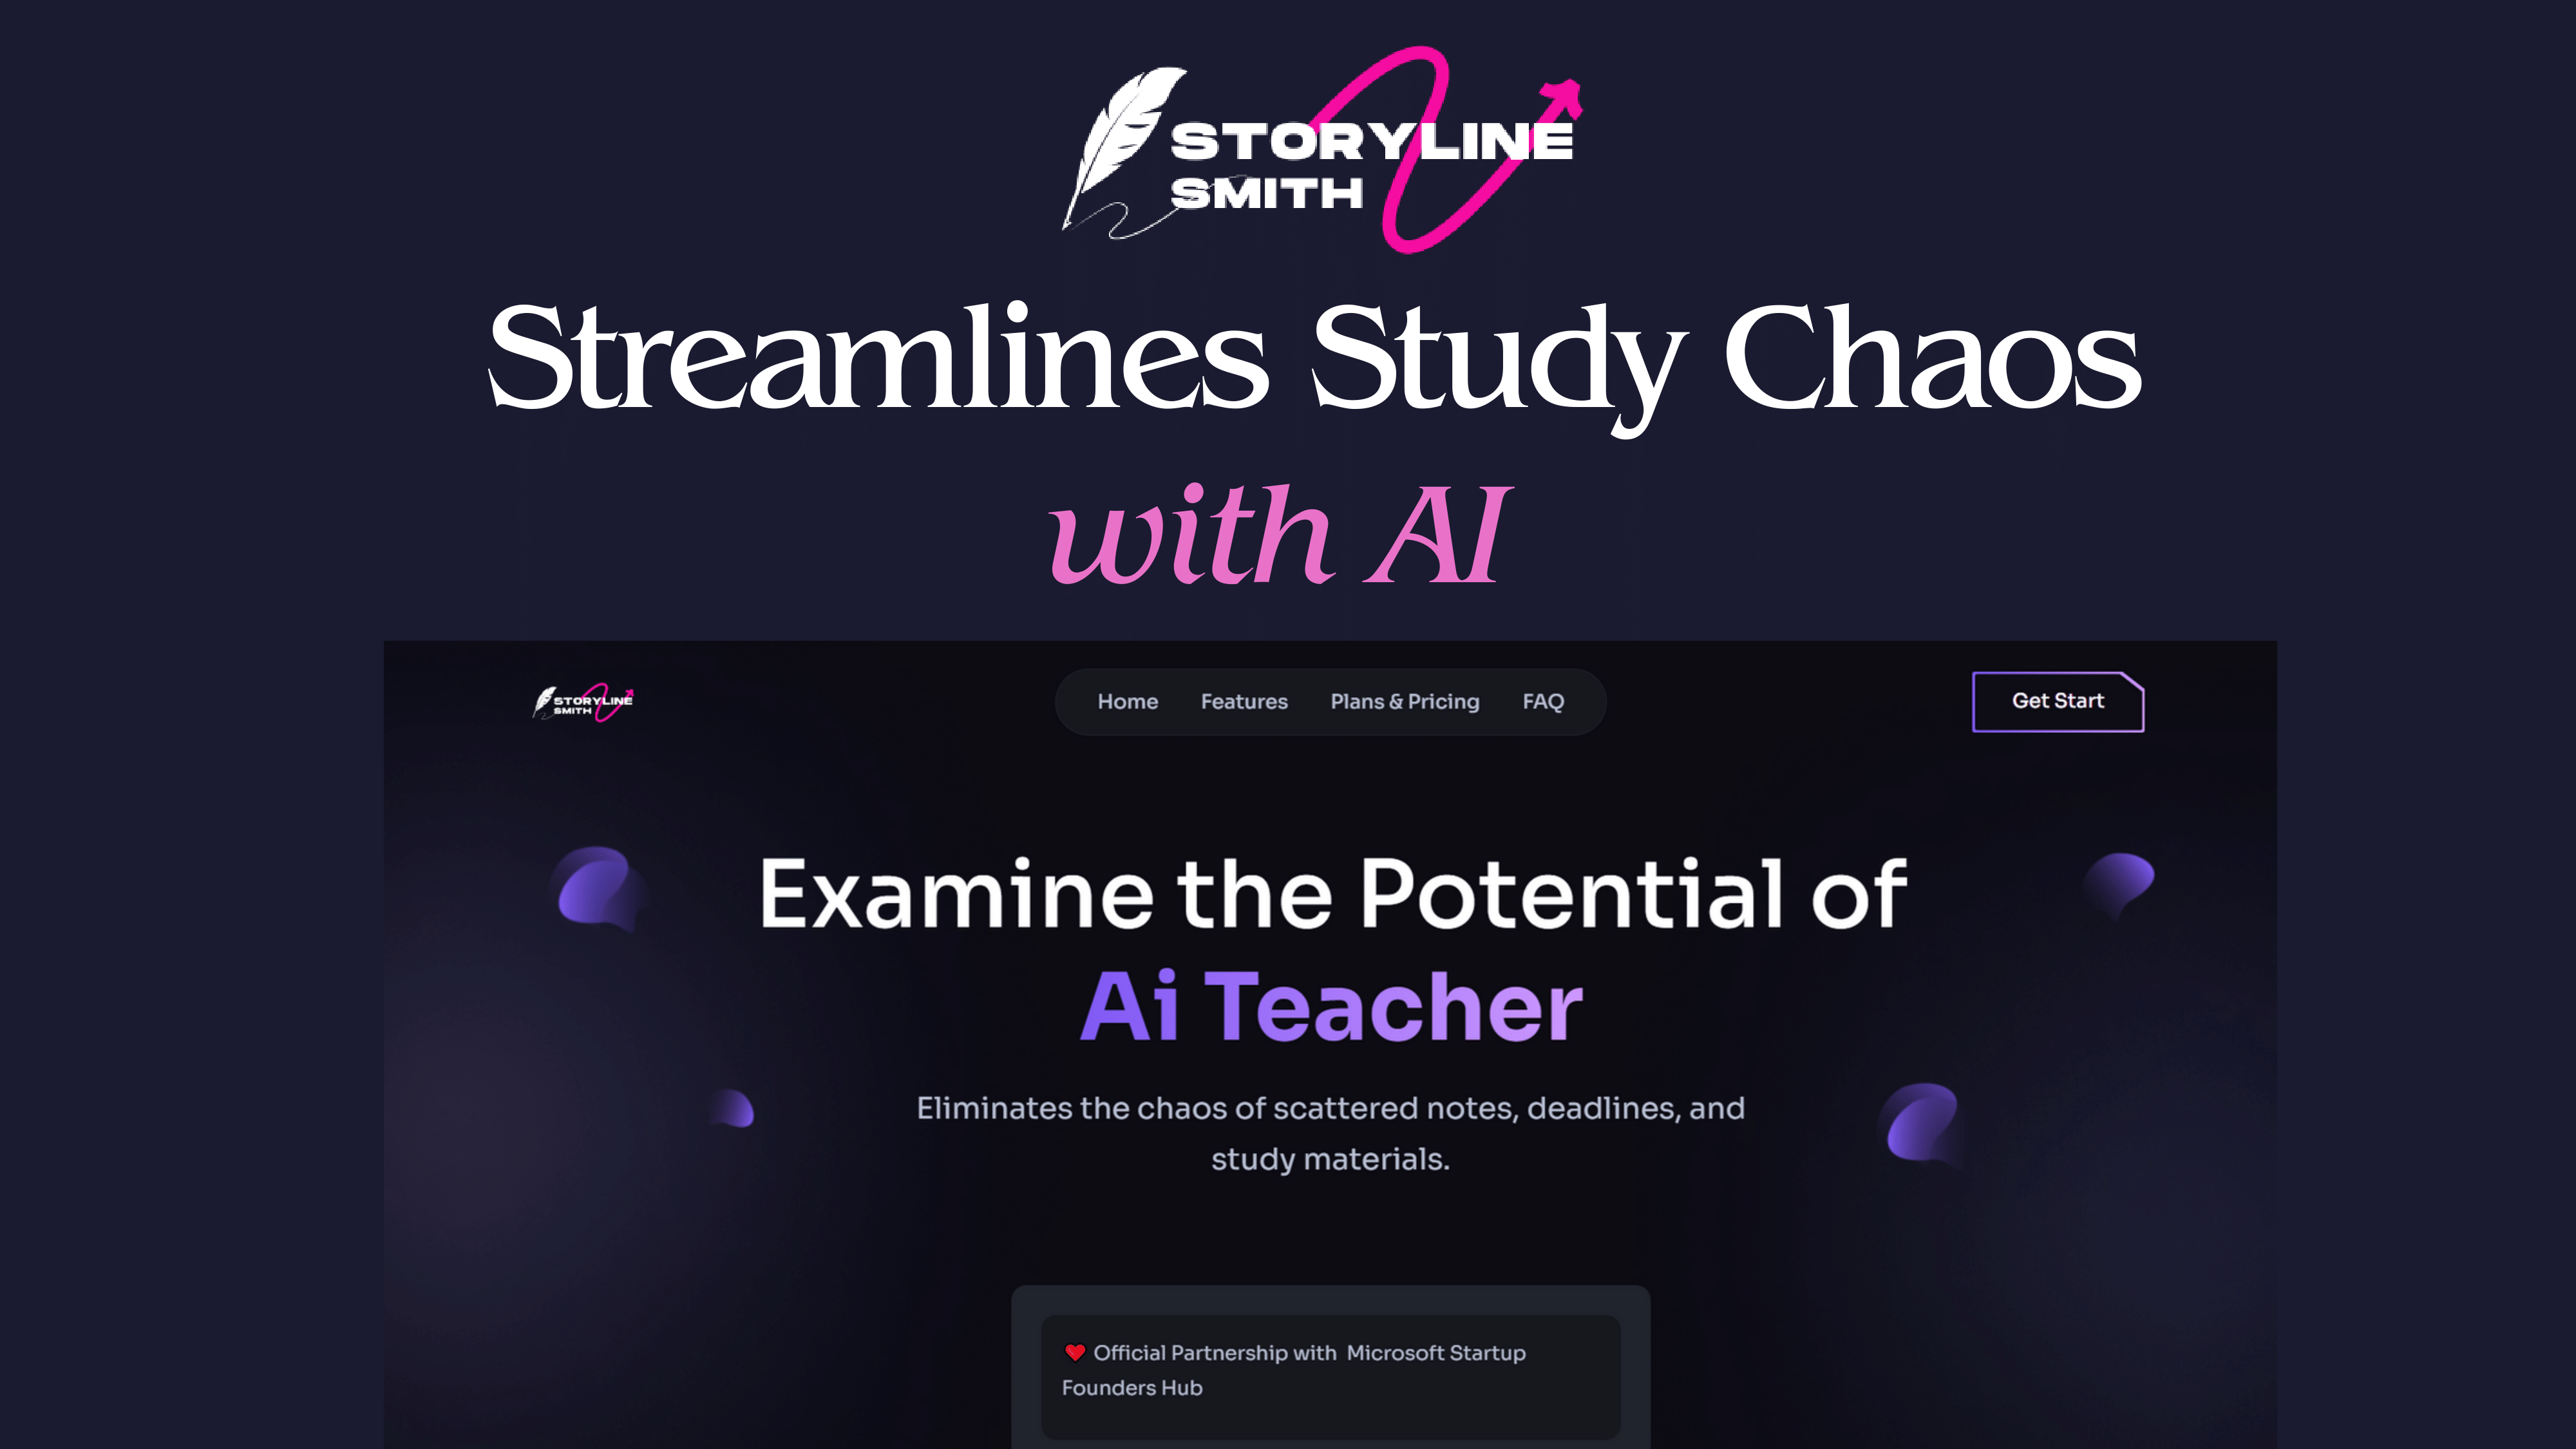 storyline-smith - Eliminate the chaos of scattered notes